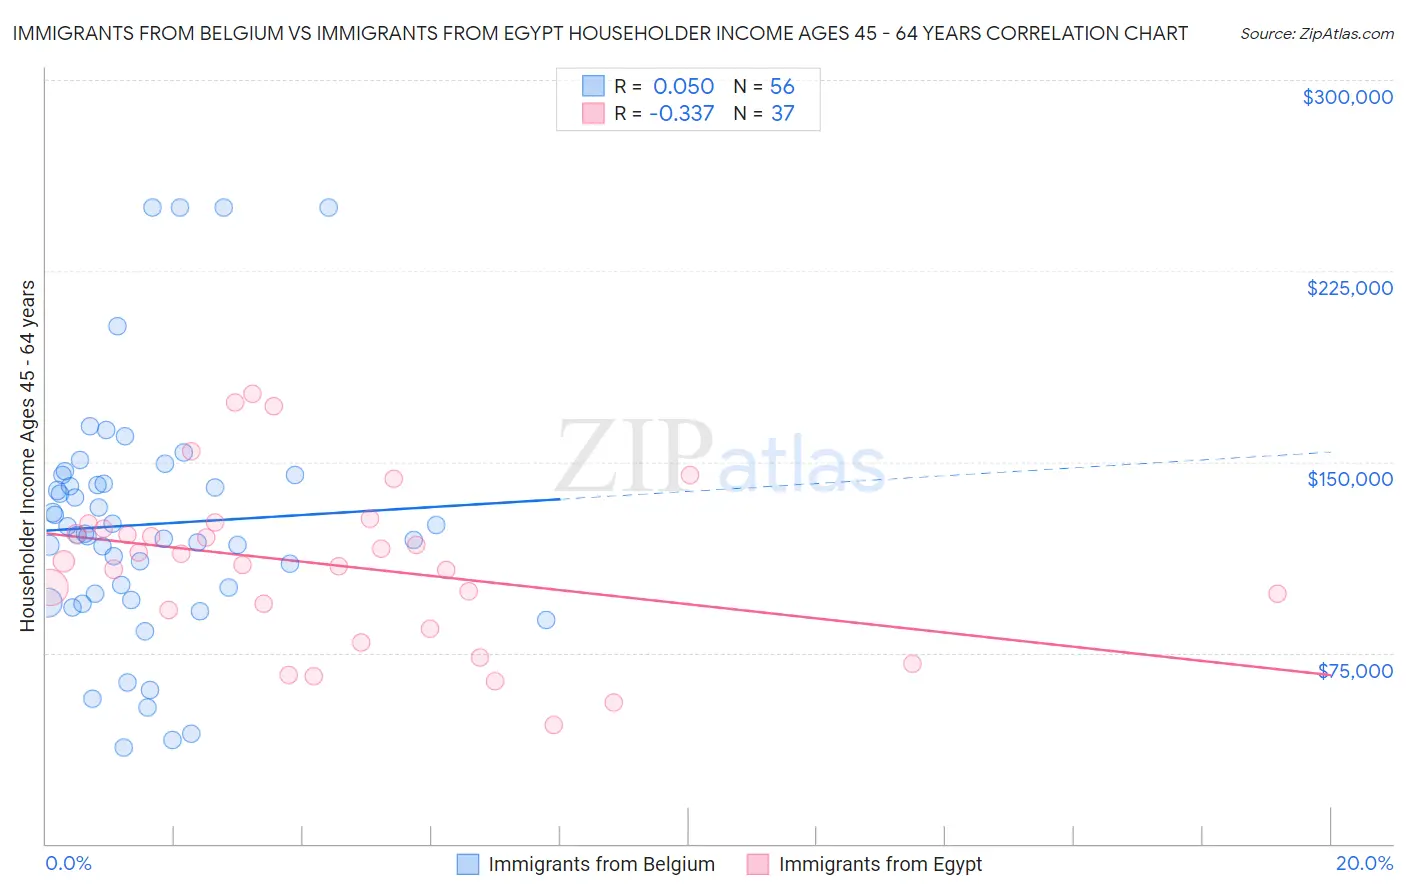 Immigrants from Belgium vs Immigrants from Egypt Householder Income Ages 45 - 64 years